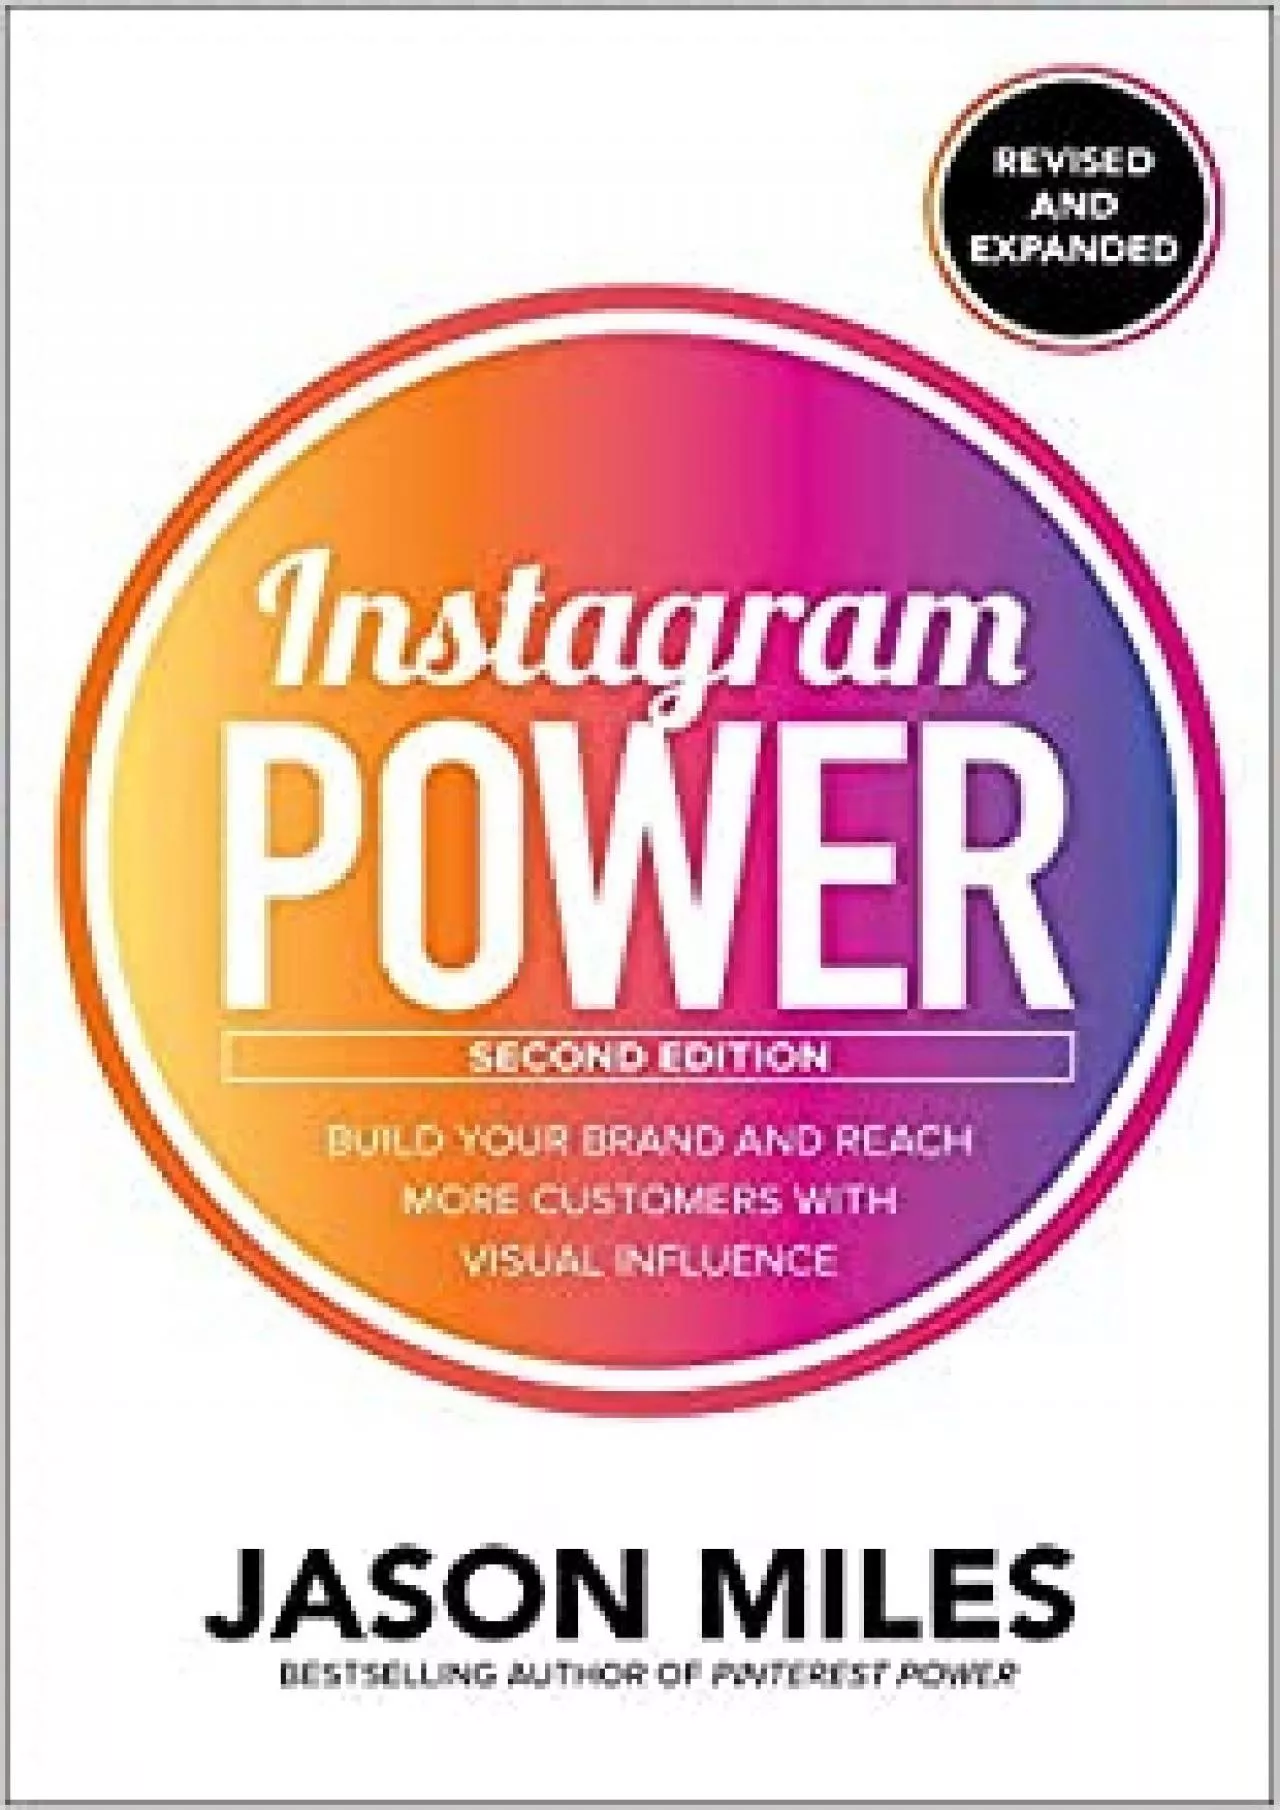 Instagram Power, Second Edition Build Your Brand and Reach More Customers with Visual